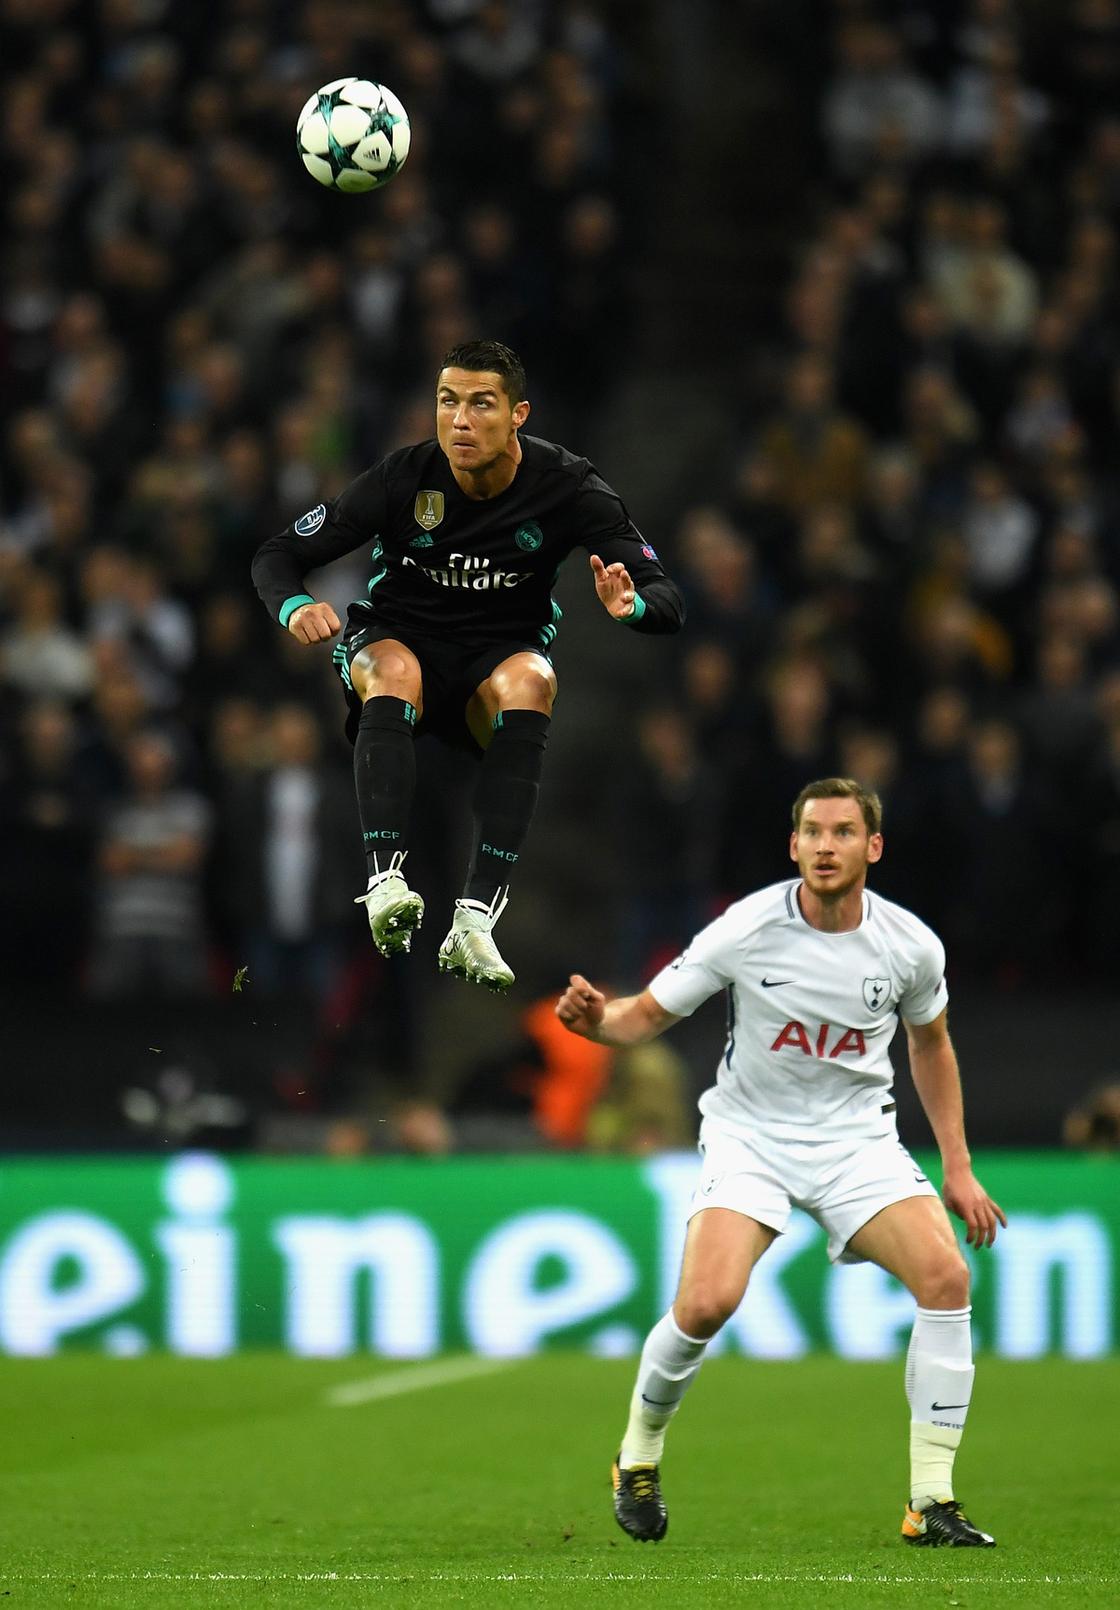 Who is the world's highest jumper in football?